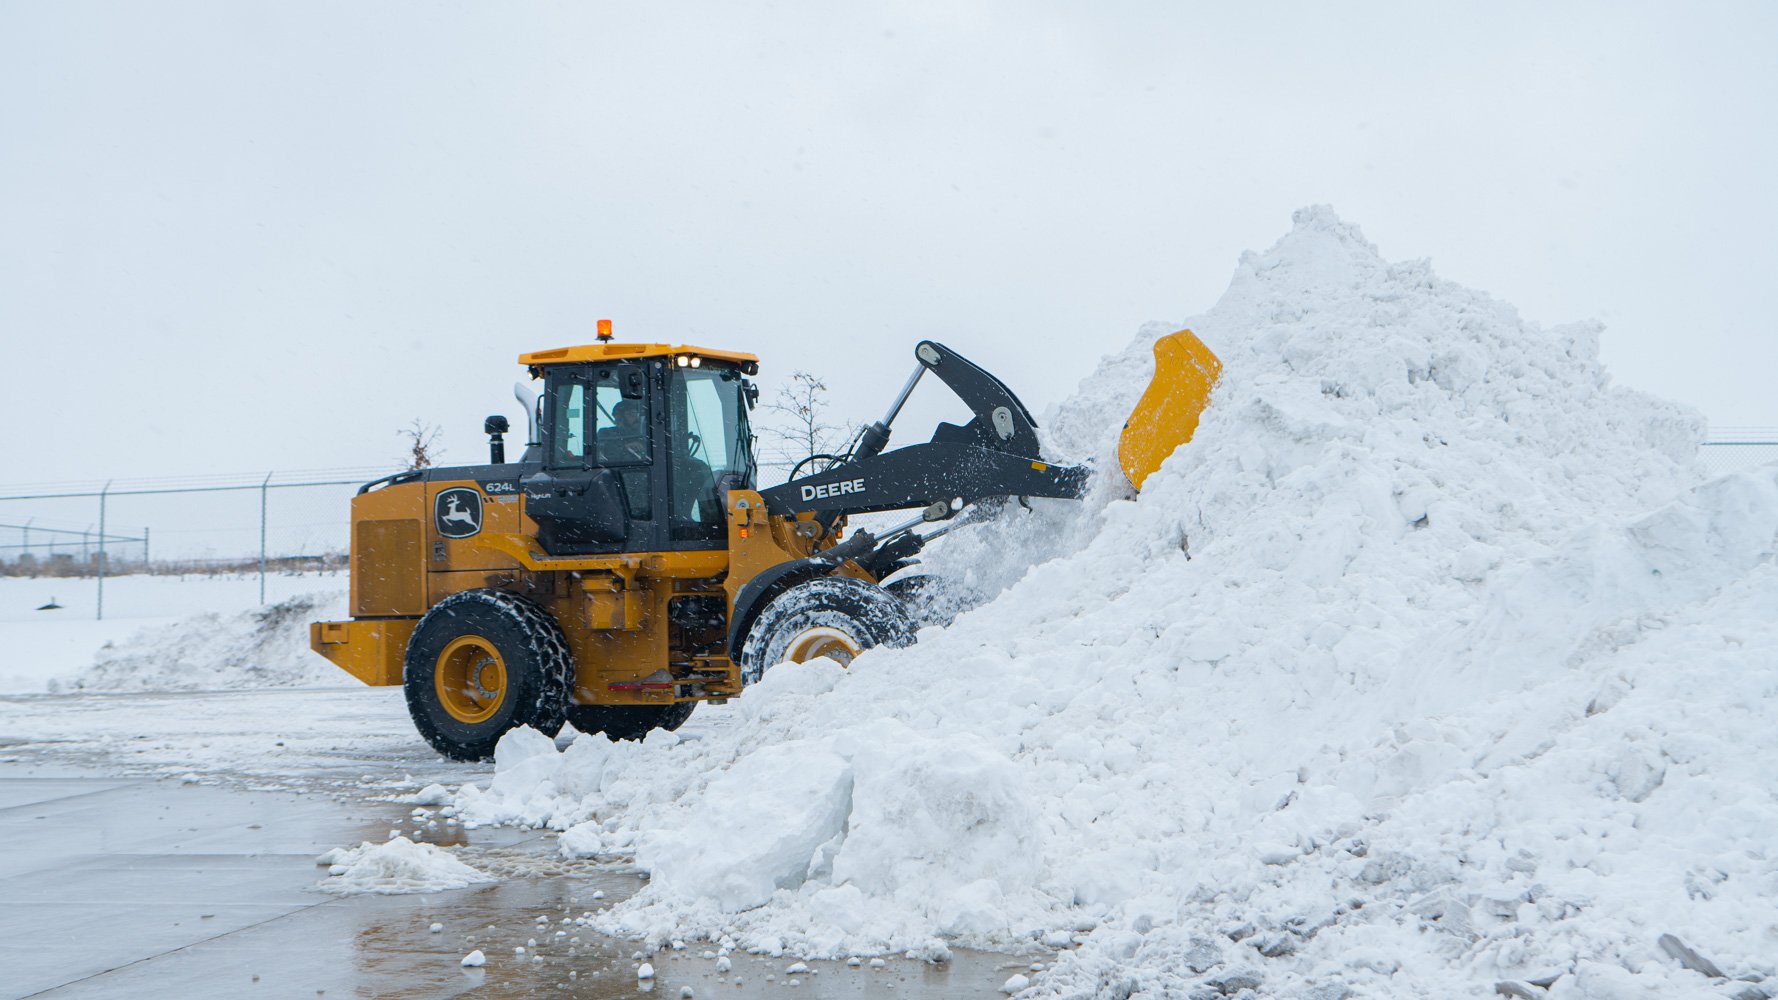 snow plow loader moving a large pile of snow on a commercial facility parking lot